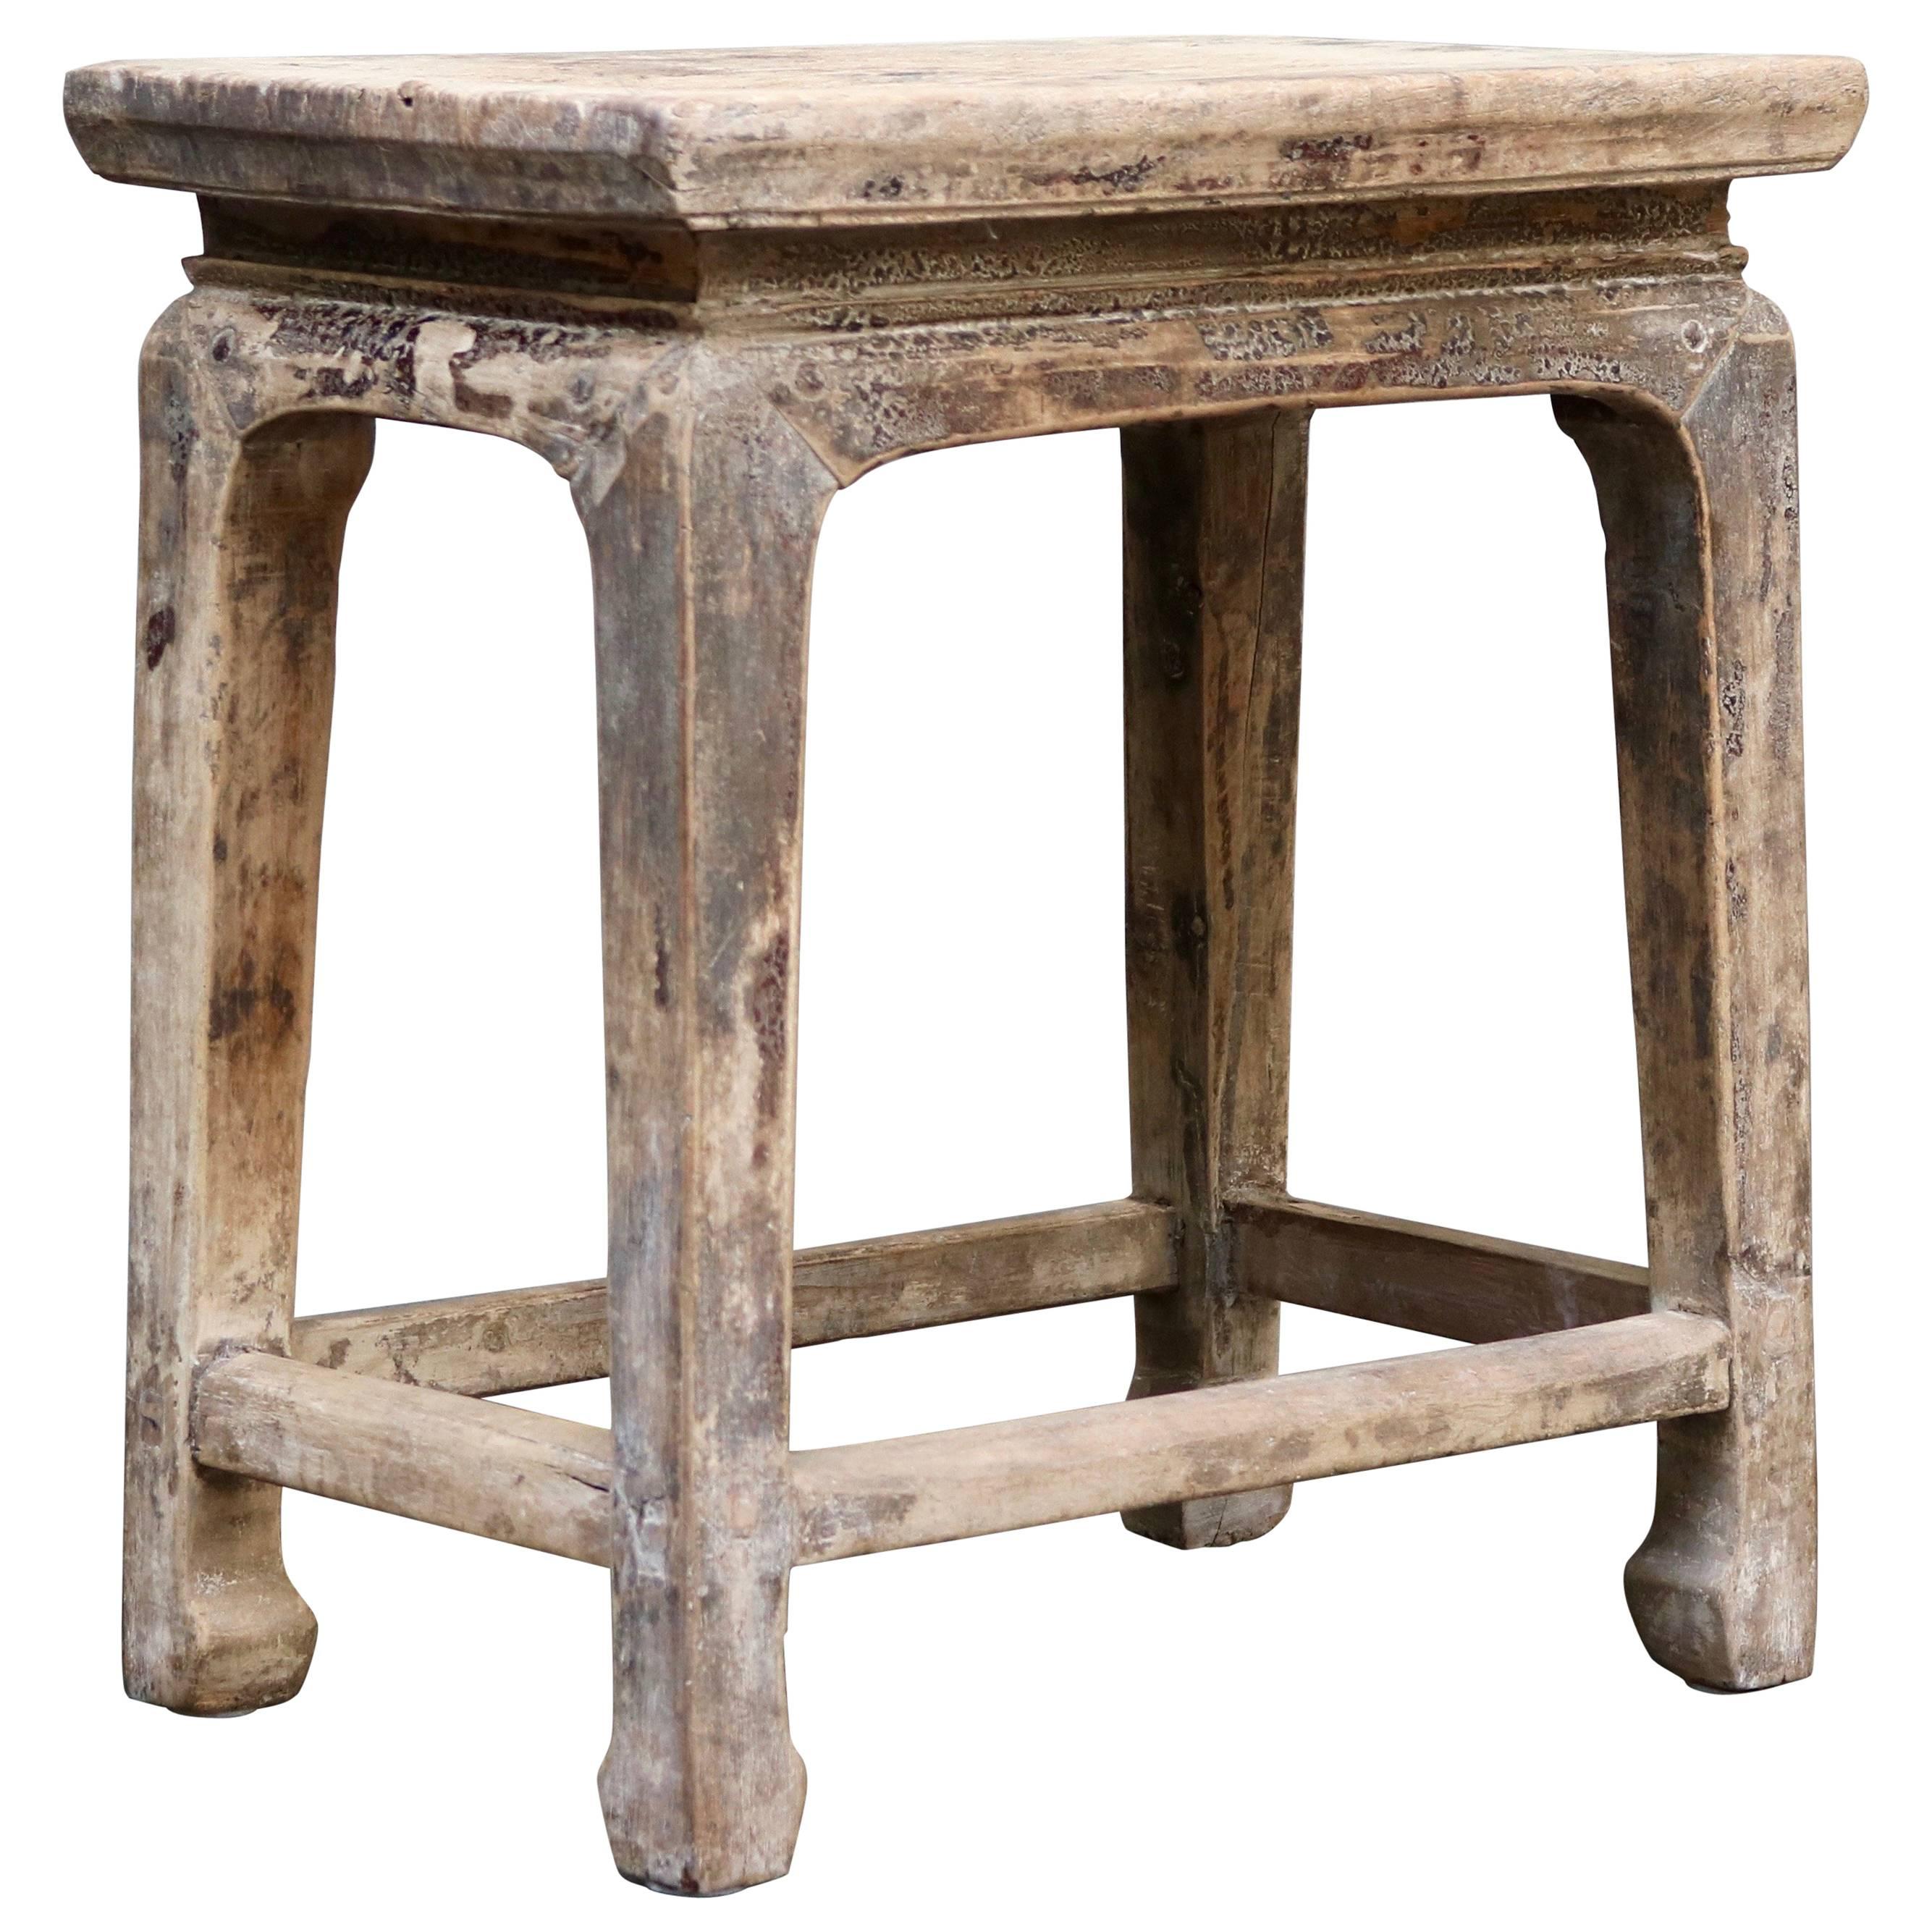 Chinese Wooden Stool from the Shanxi Province